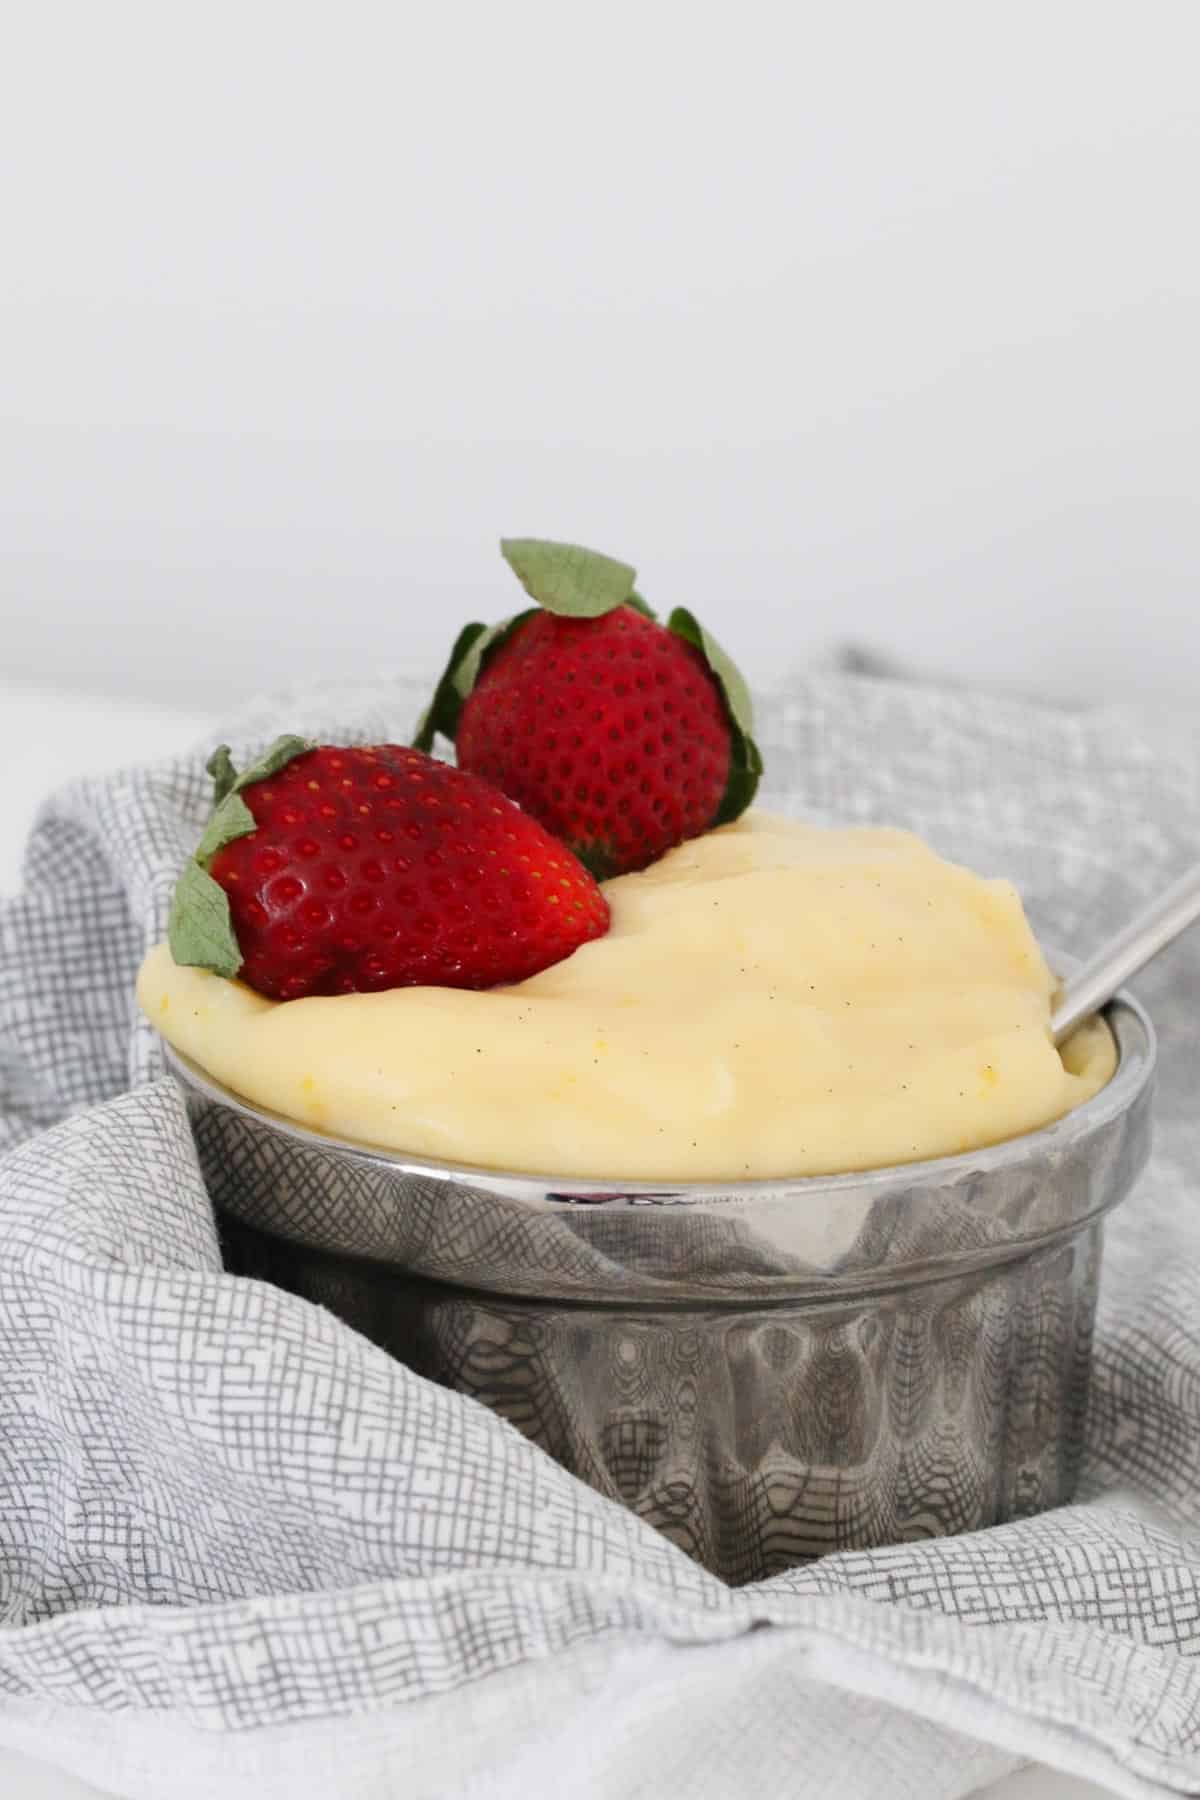 Strawberries on top of a silver bowl filled with custard.